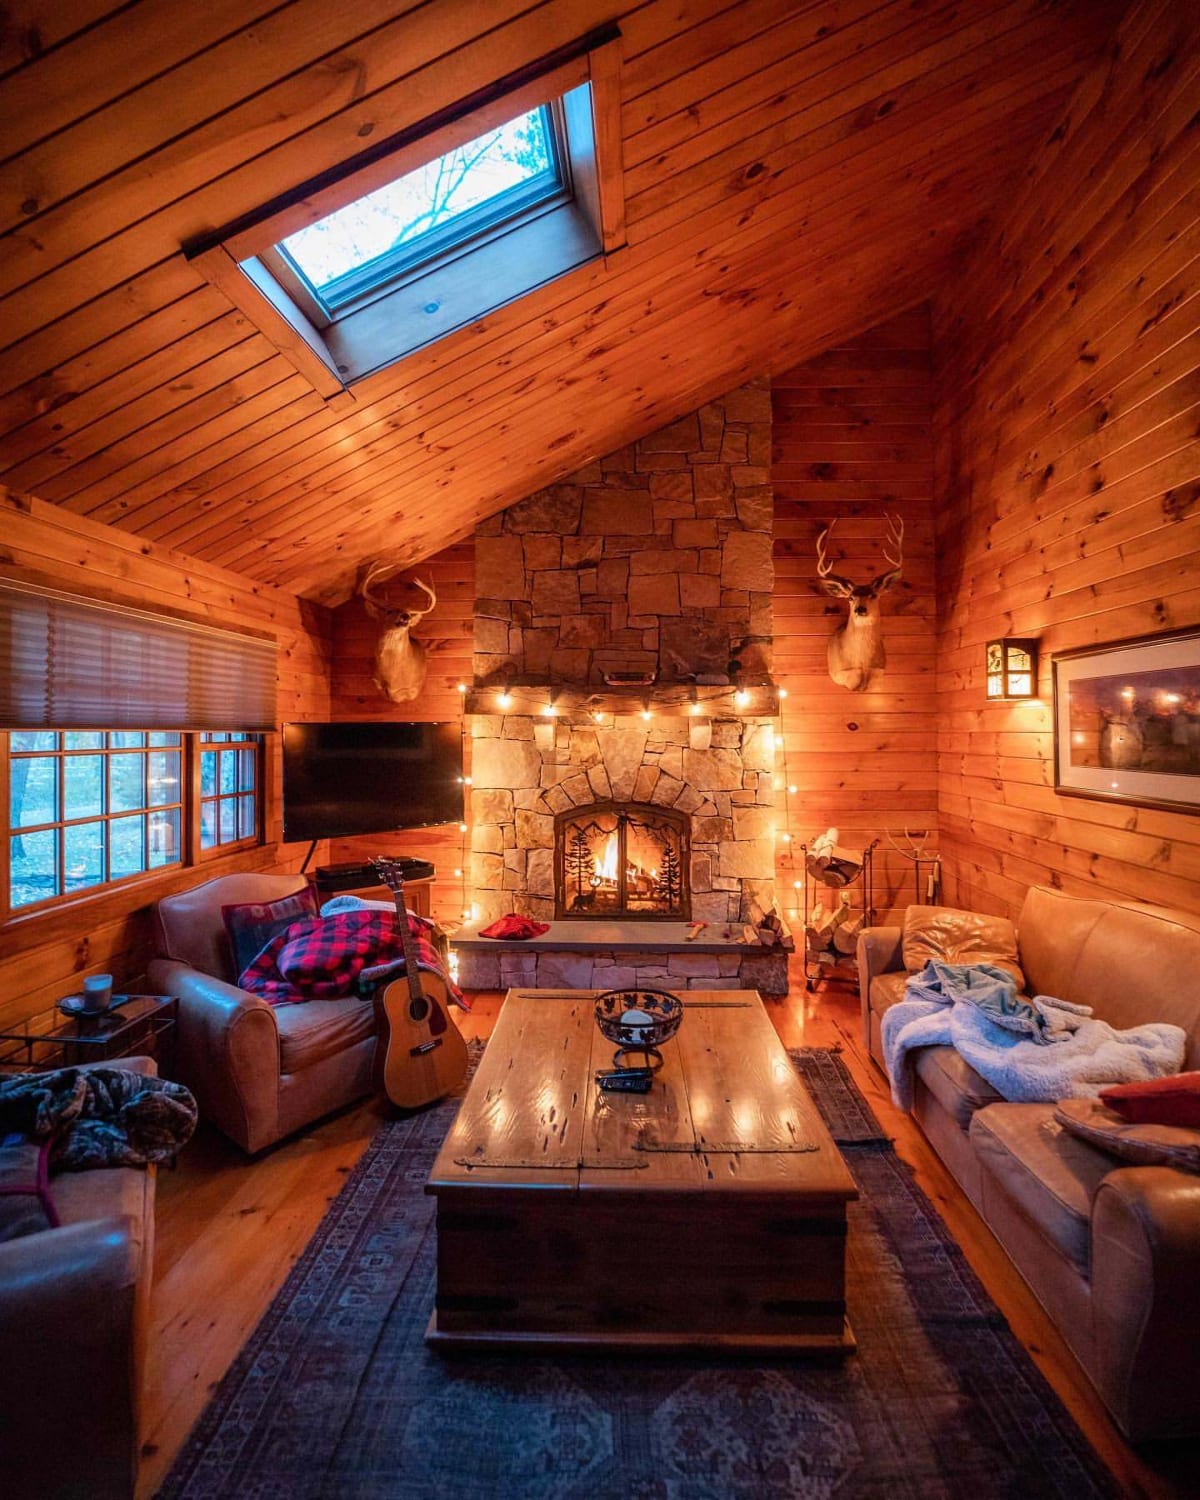 This cozy and rustic living room of a log cabin located in the Berkshire Mountains, Massachusetts